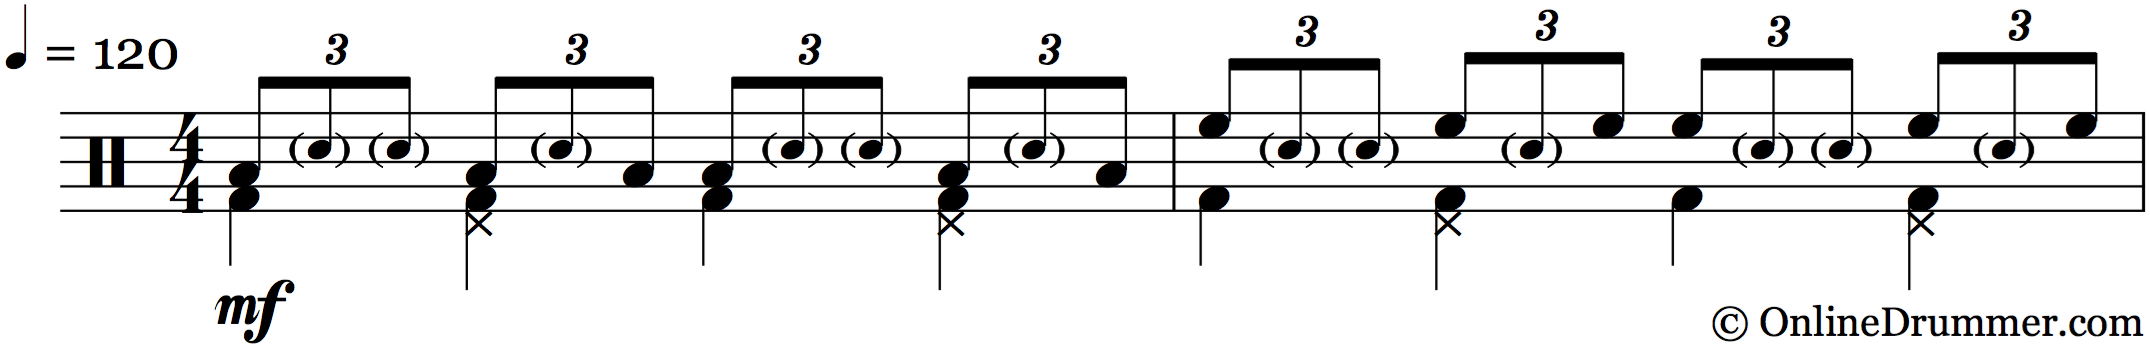 Drum notation for the "Balancing the Hands - Swing" drum lesson.